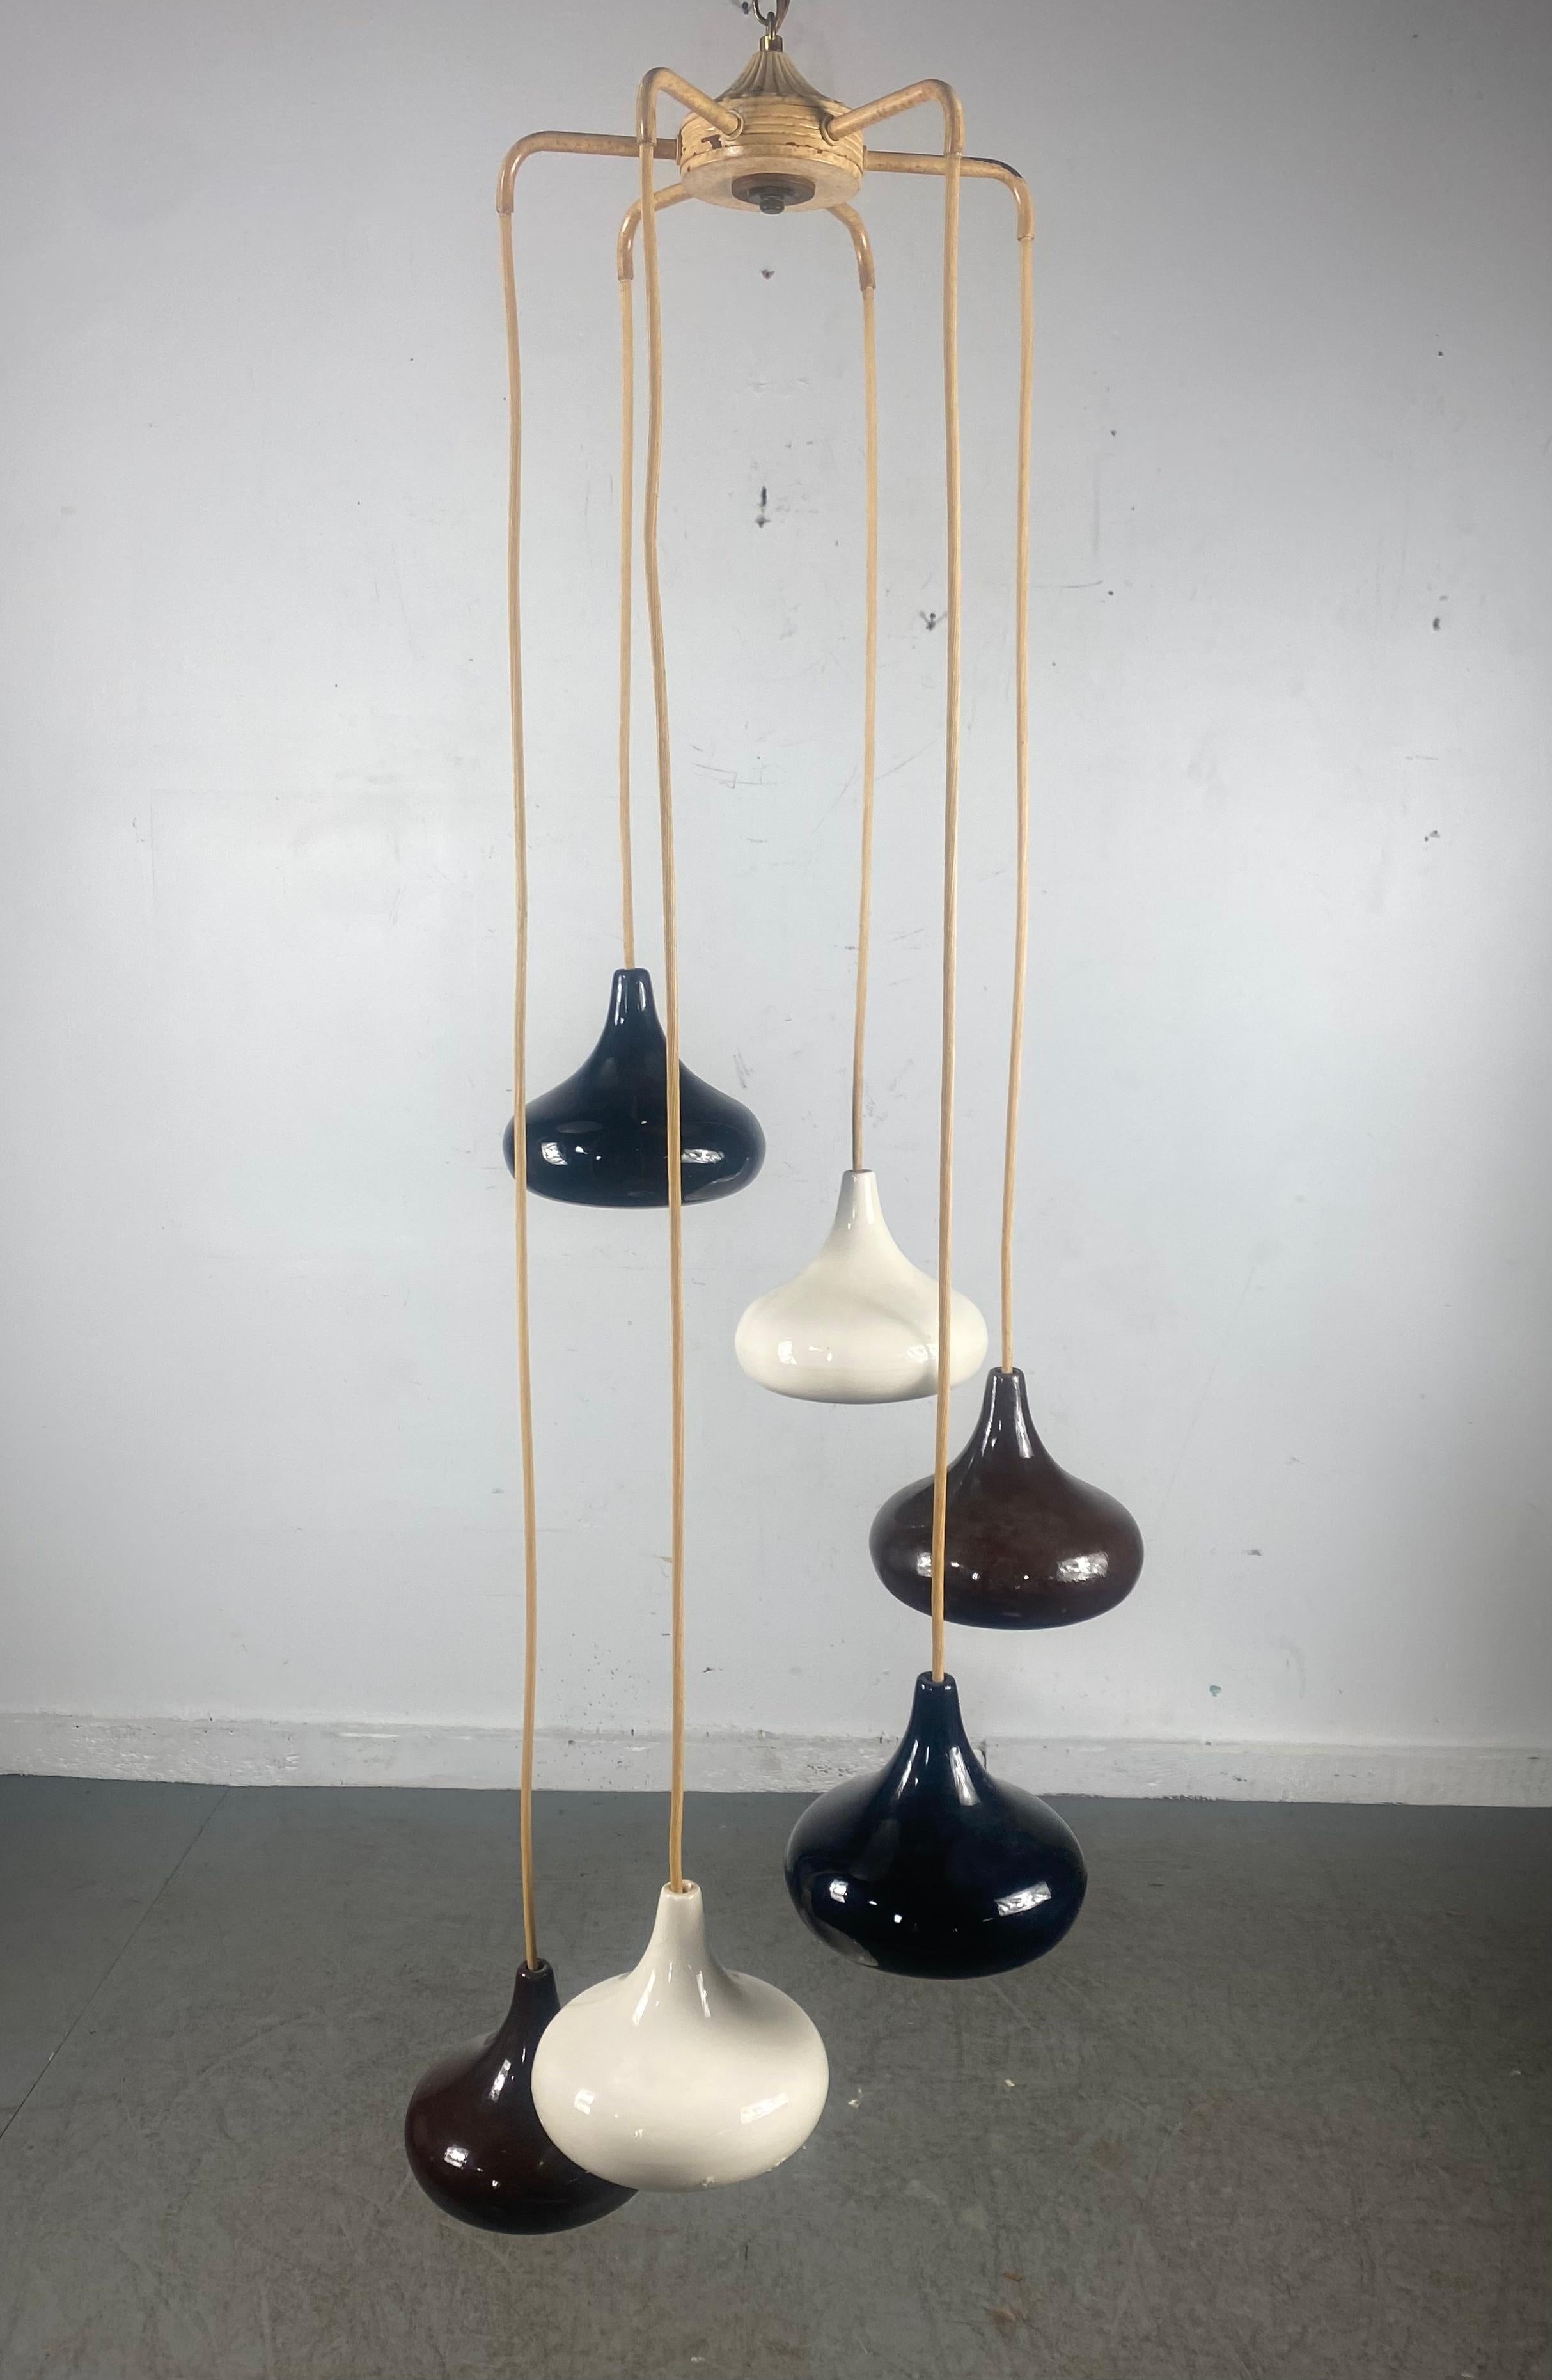 Stunning cascading ceramic pendant light consisting of 6 graduating (hersey kiss) shape fixtures of white, black and chocolate brown, tested and electrical working, individual lamps measure 6.5 x 7 in diameter.